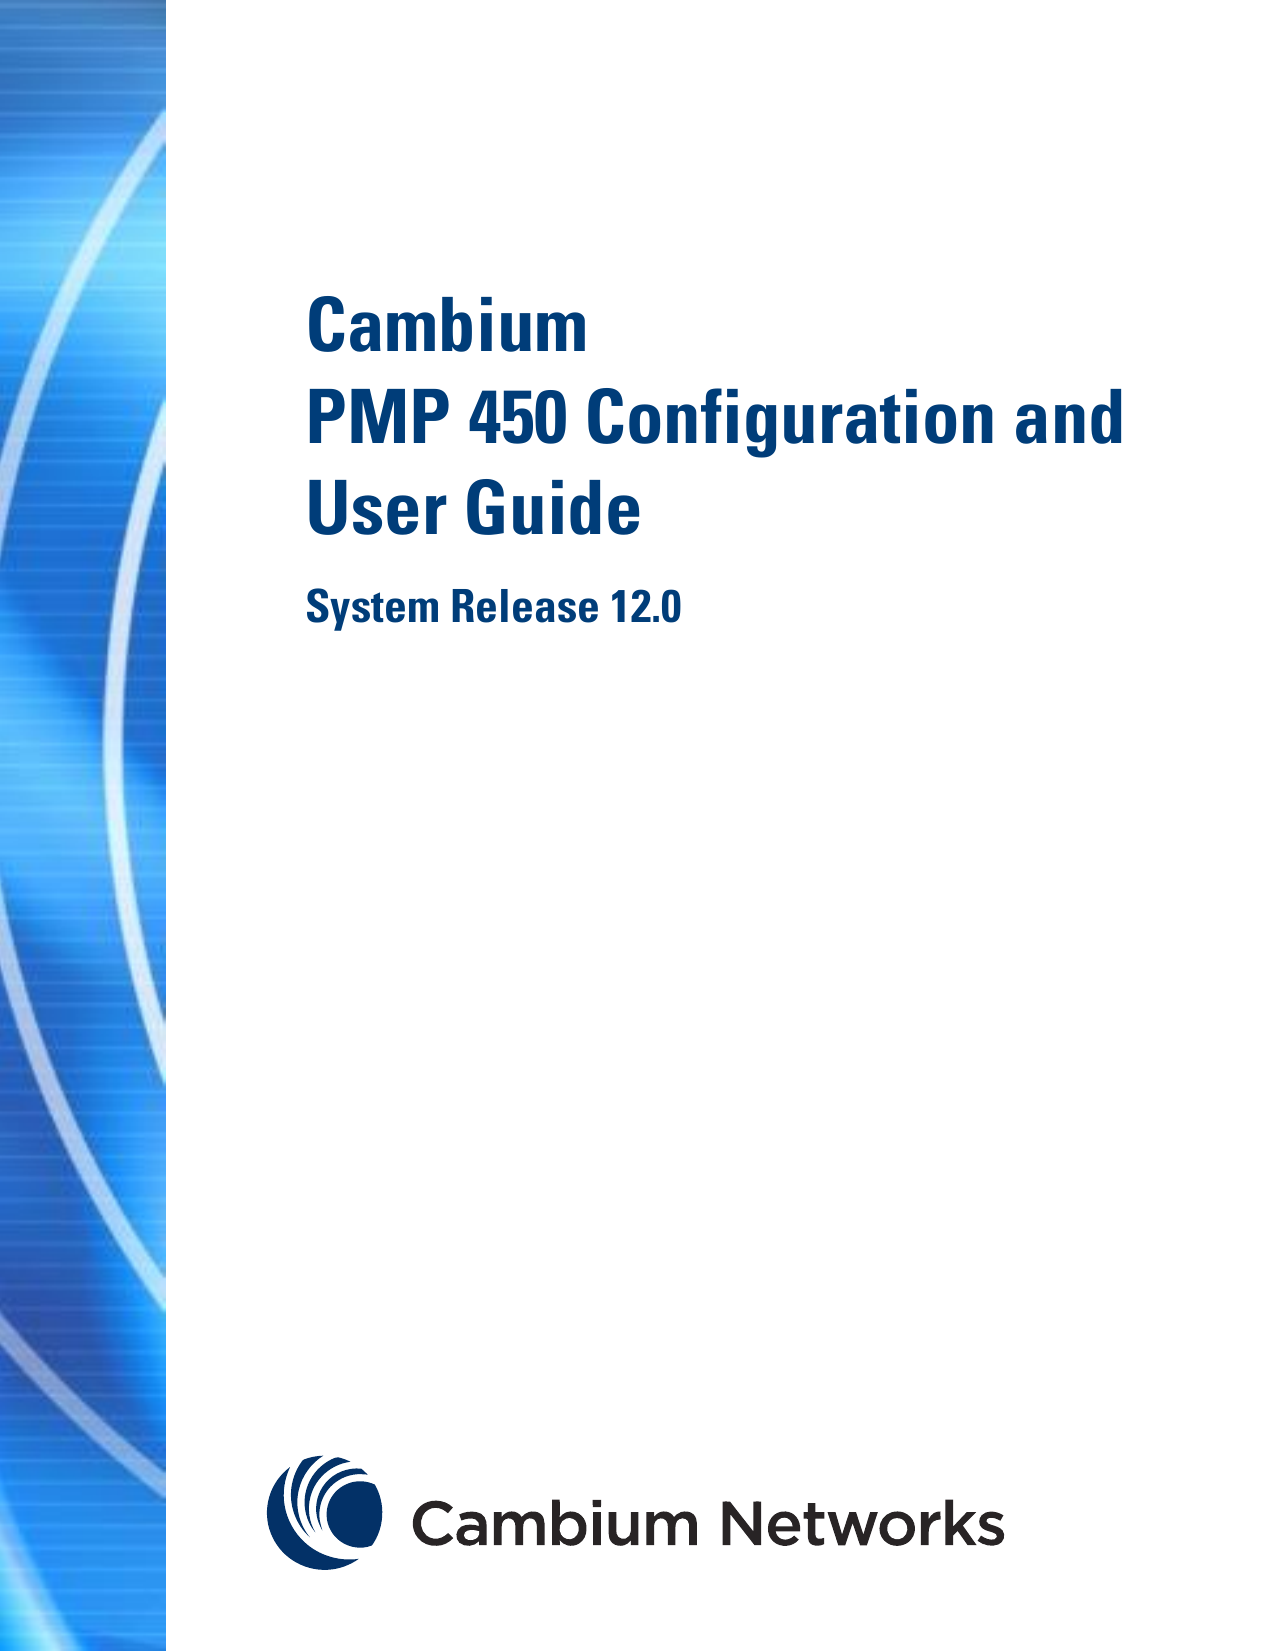       Cambium PMP 450 Configuration and User Guide System Release 12.0   